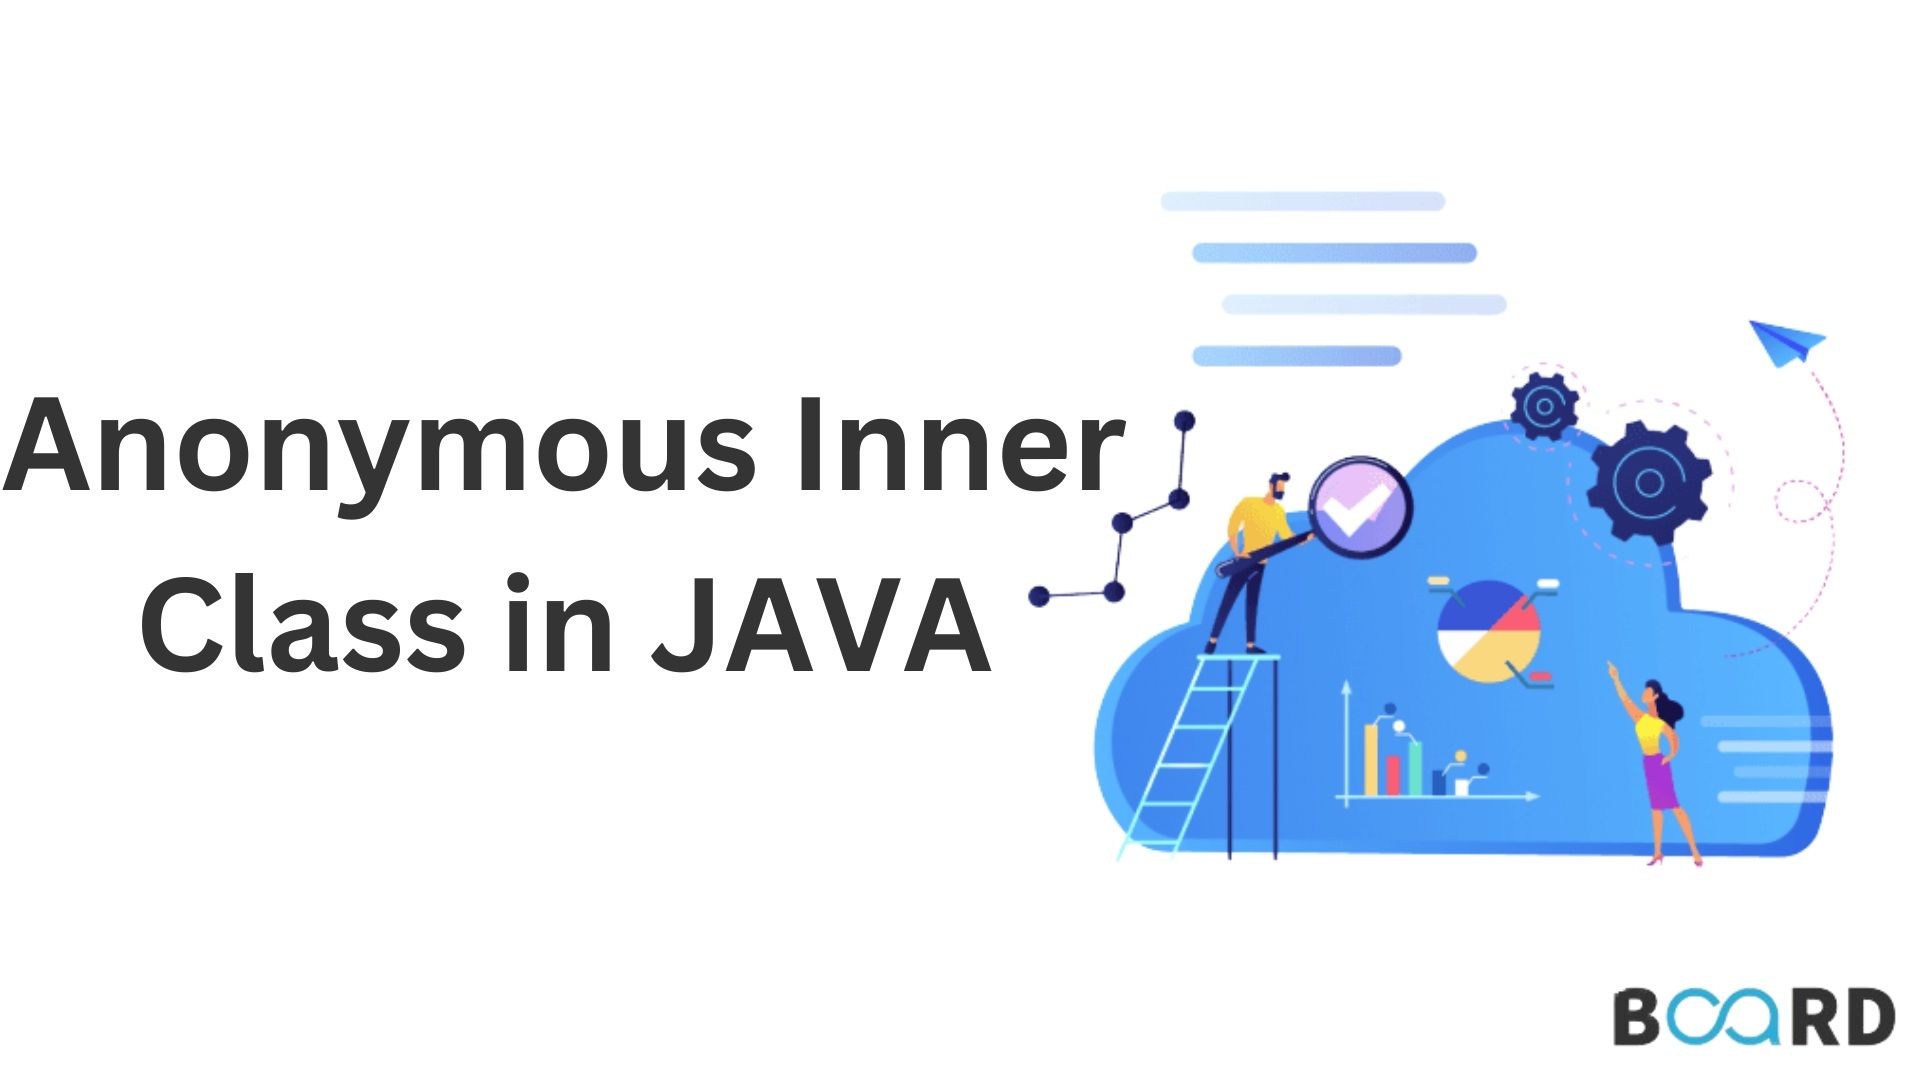 Write an Anonymous Inner Class in Java